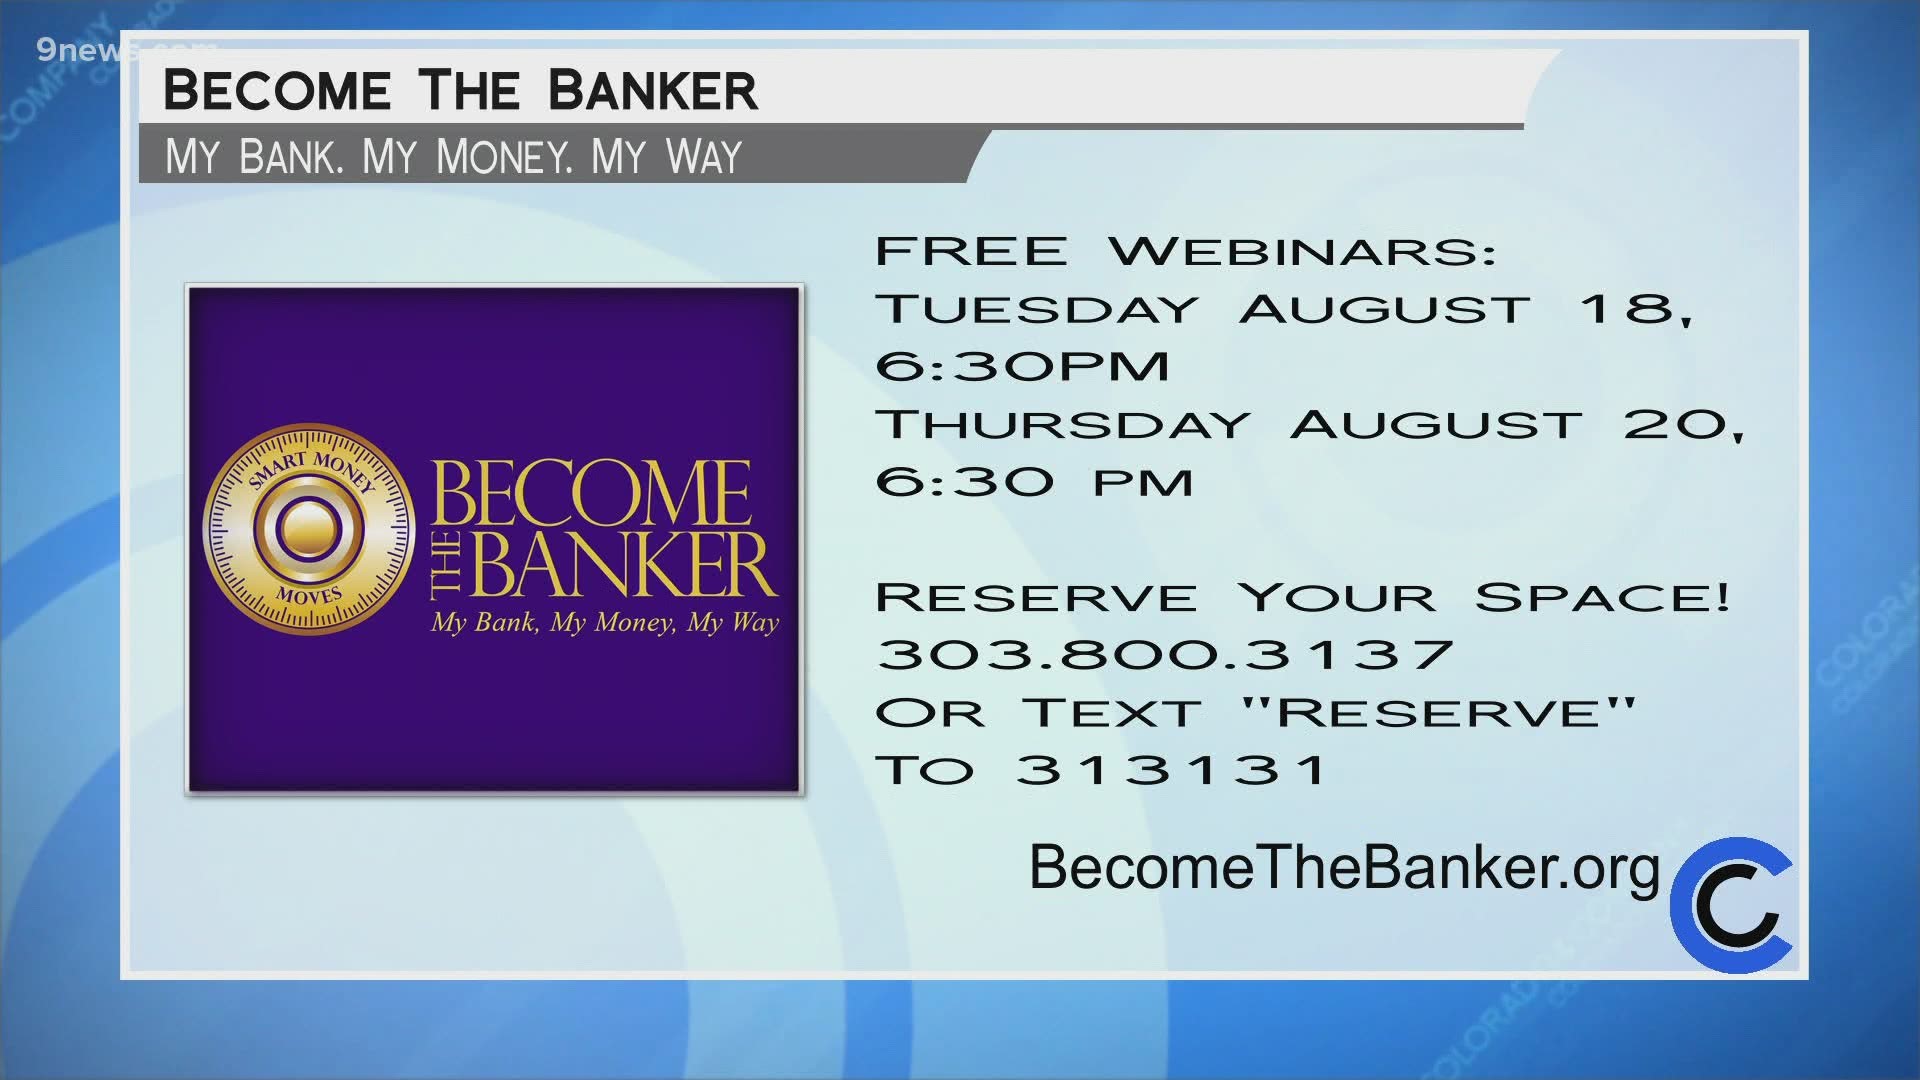 There are two webinars coming up: August 18th and 20th--both at 6:30PM. Learn more at BecomeTheBanker.org or call 303.800.3137. You can also text RESREVE to 313131.